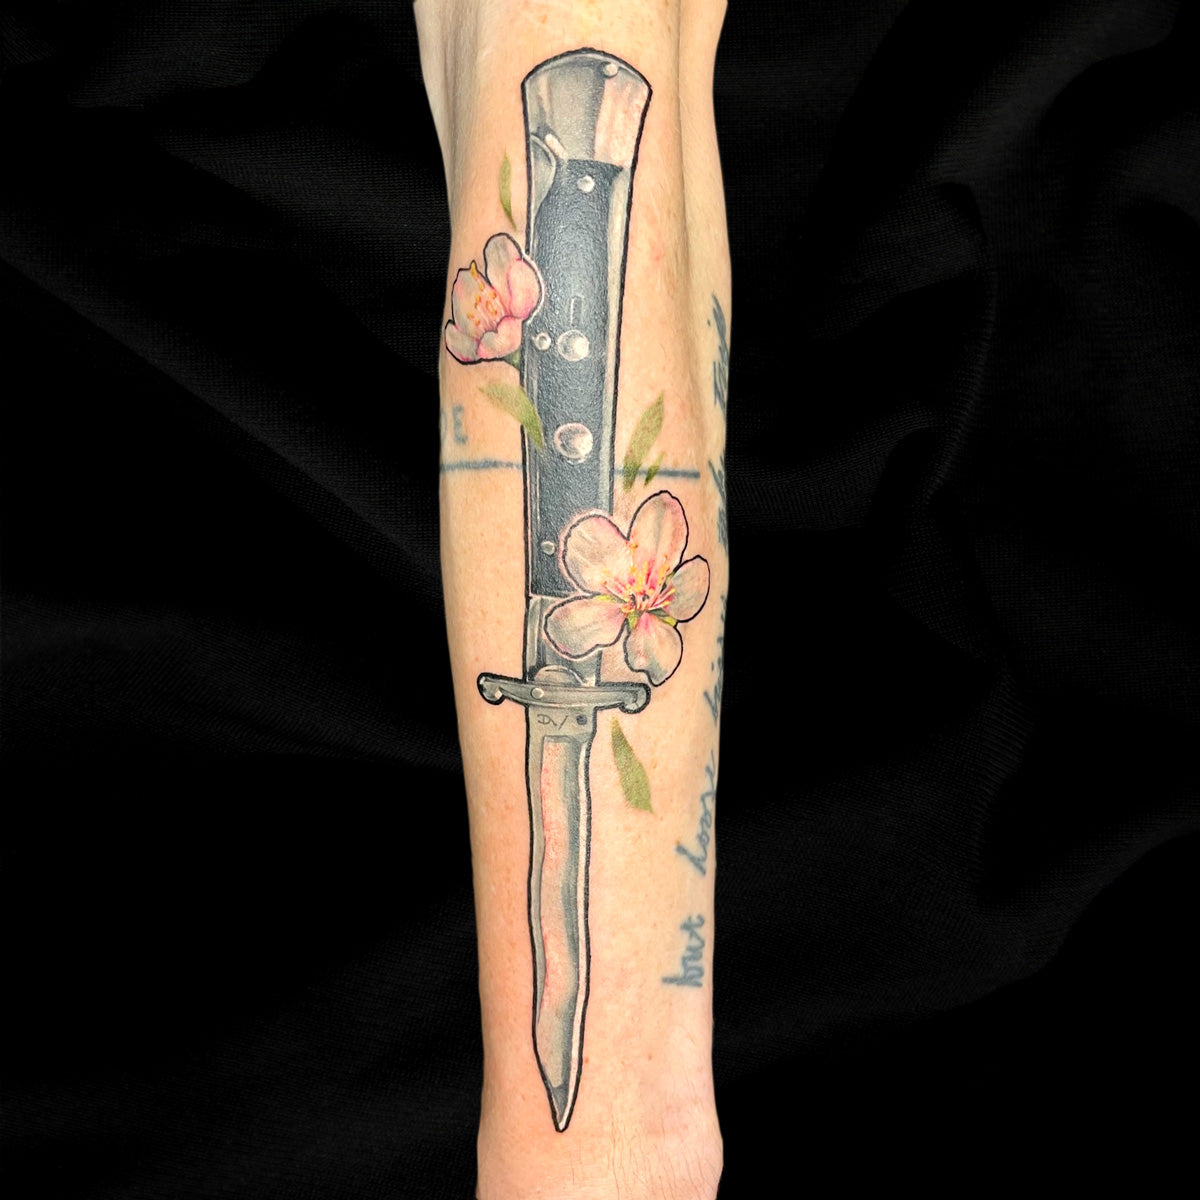 Hybrid realism knife tattoo by Cass Brown